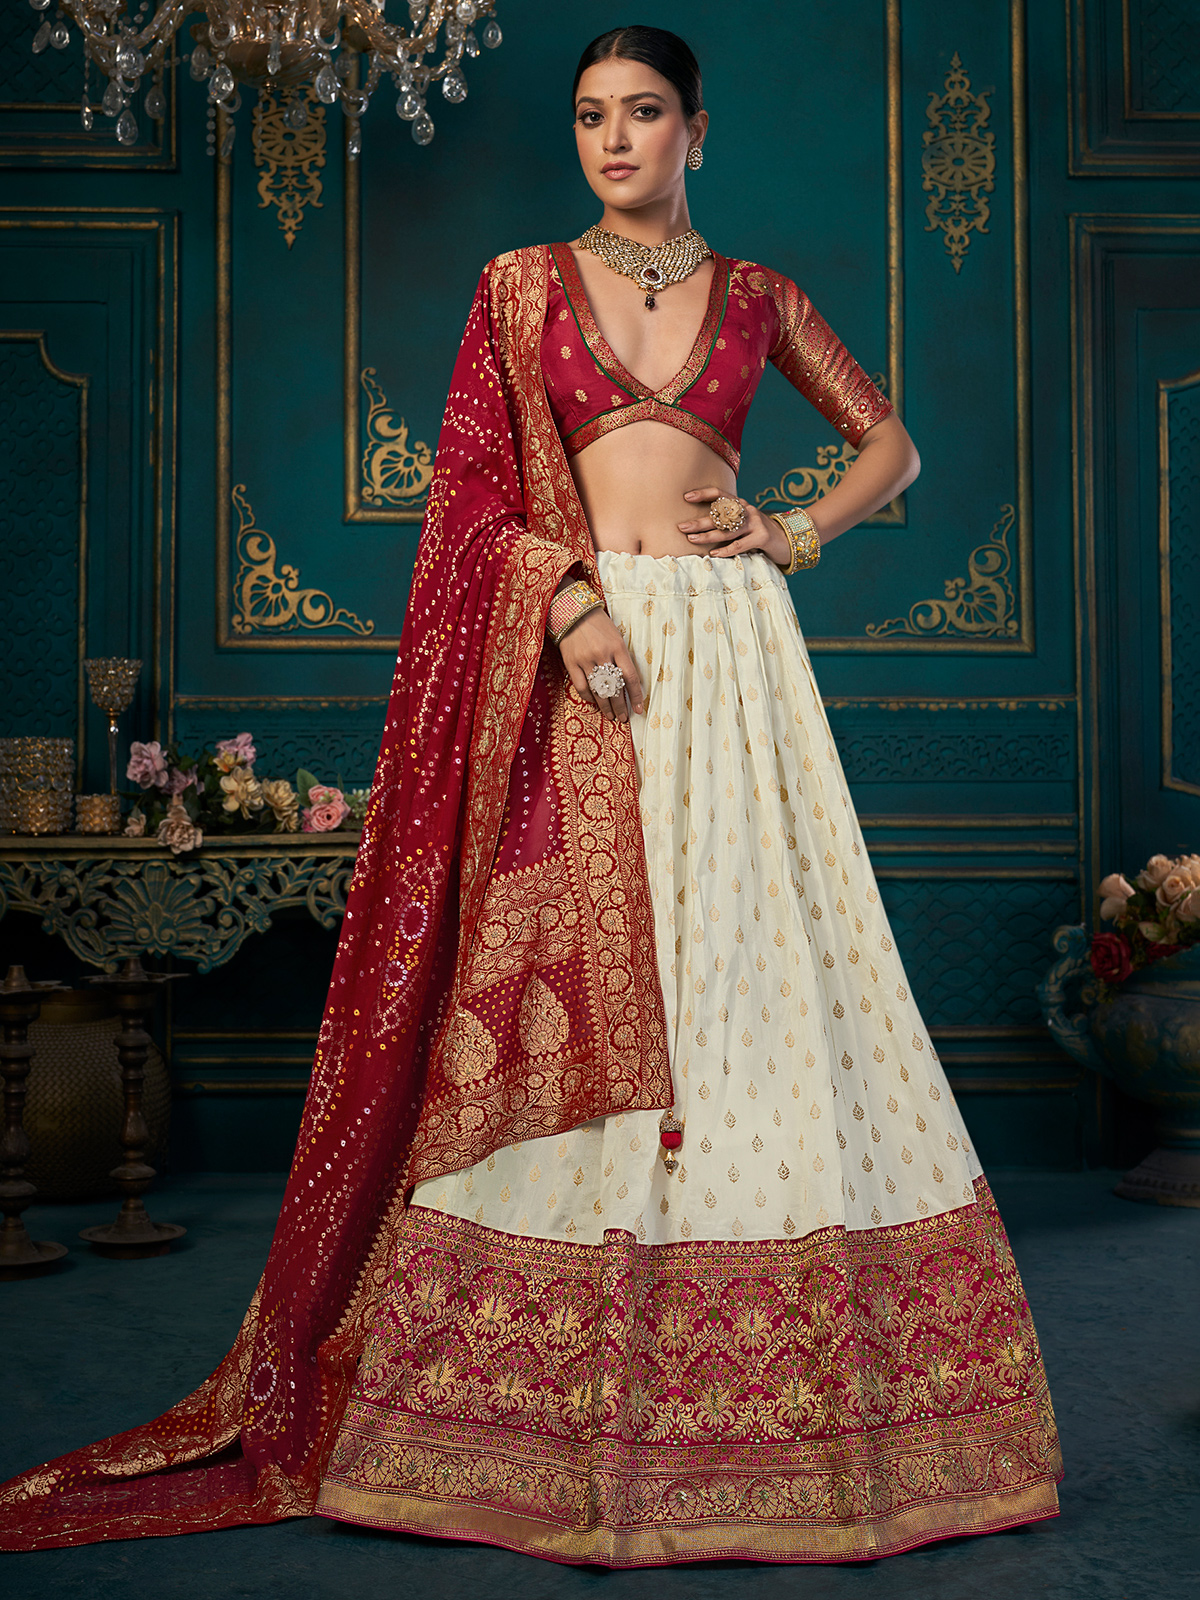 Off White and Rust Red Sequined Chinnon Lehenga Choli {With Can Can} |  Nimbdee